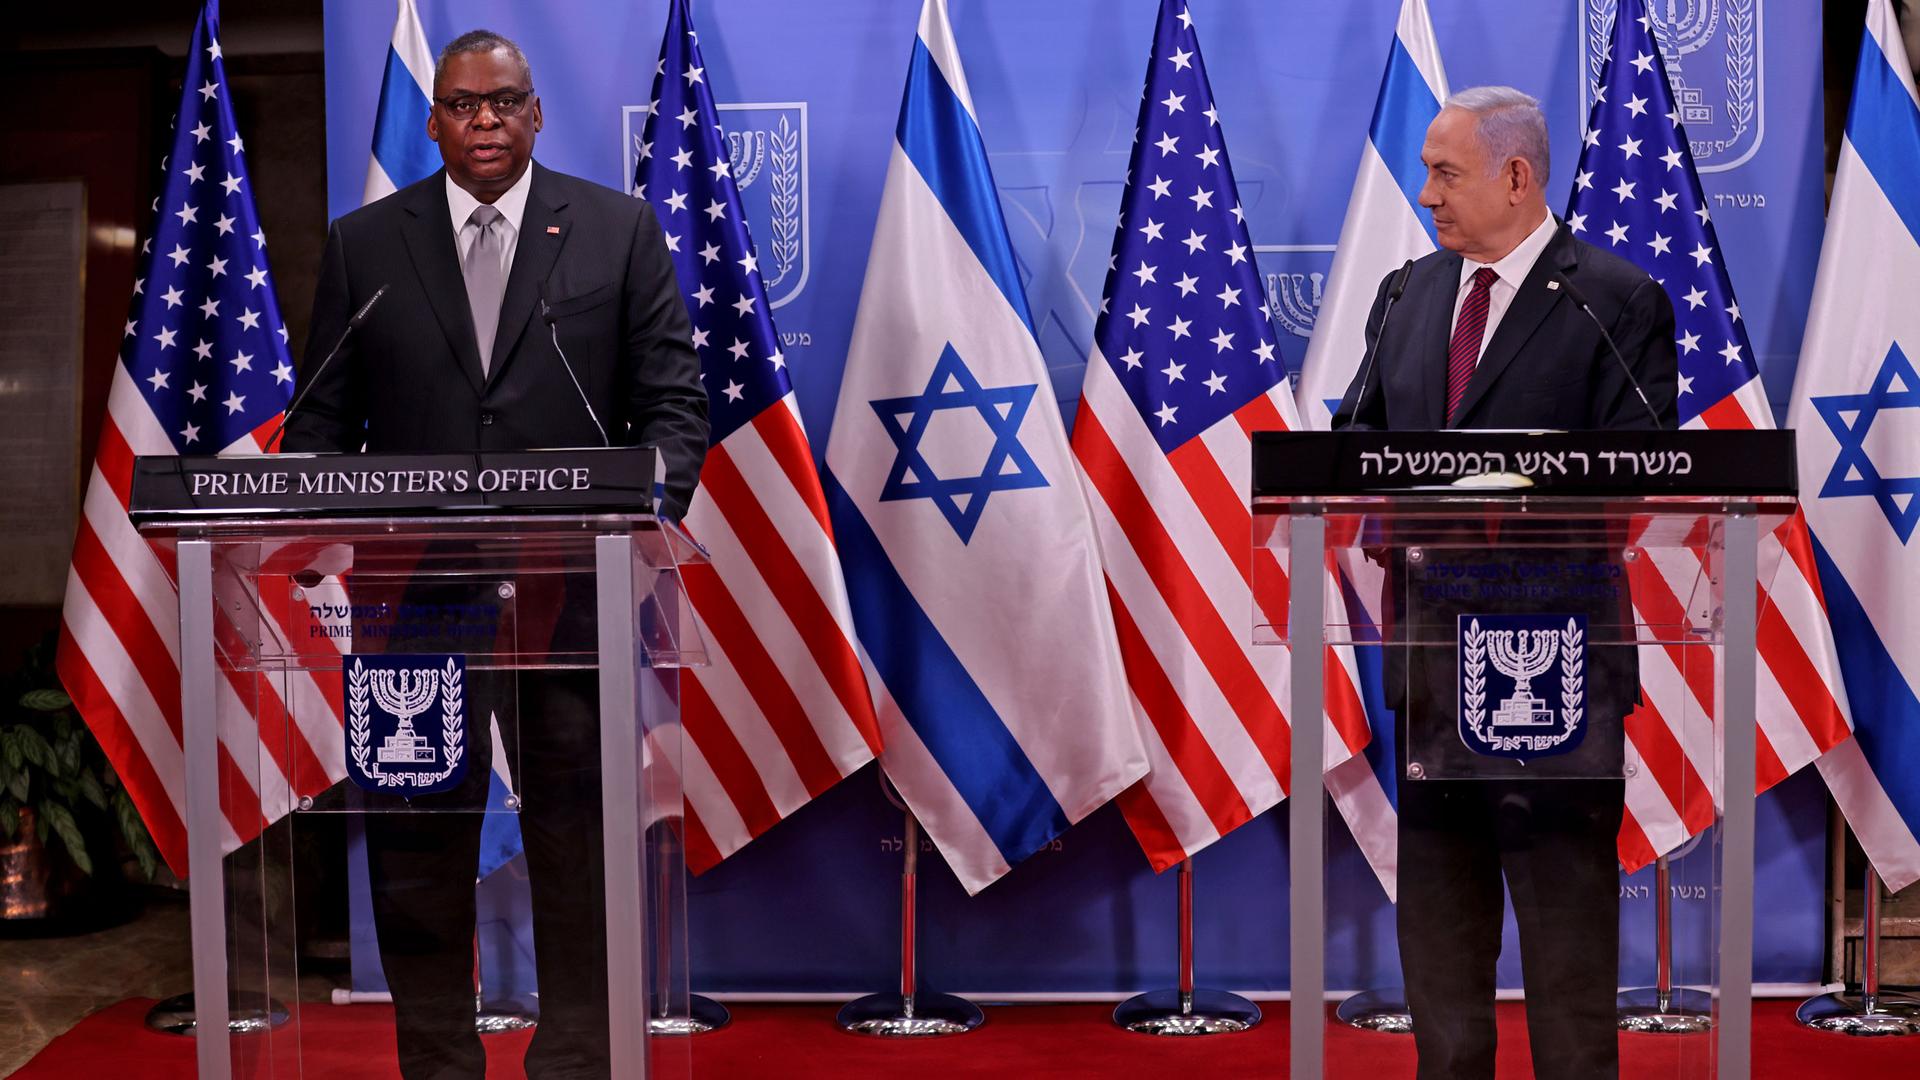 US Defense Secretary Lloyd Austin and Israeli Prime Minister Benjamin Netanyahu are shown each standing behind podiums with US and Israeli flags in the background.